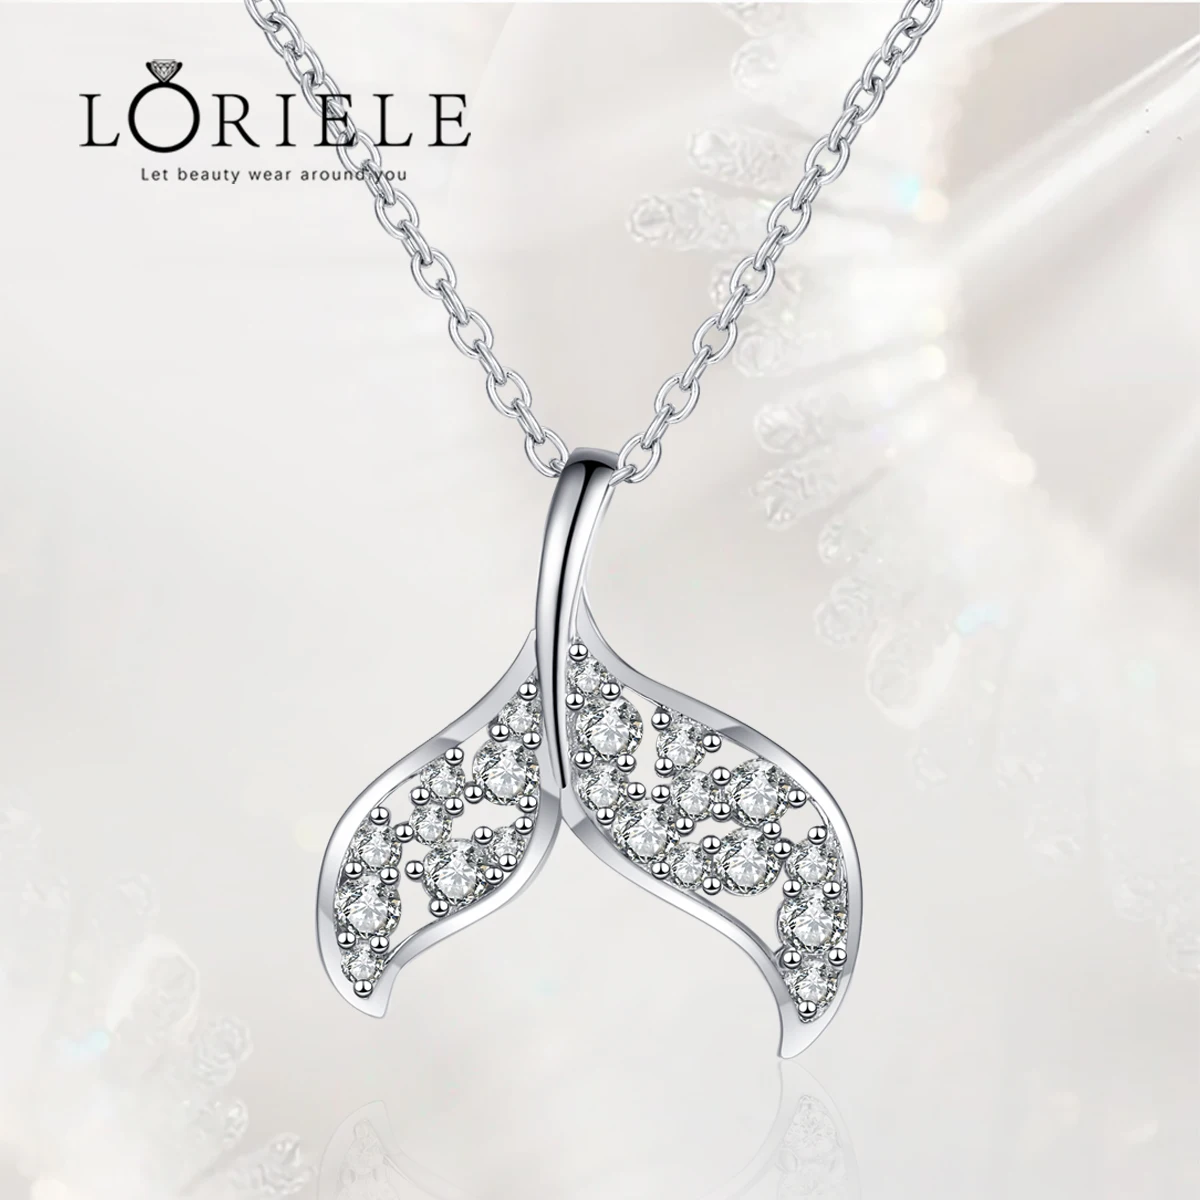 

LORIELE 925 Sterling Silver Mermaid Tails Pendant Necklace Pass Diamond Test Moissanite Good Luck Necklace Gift for Girls Women